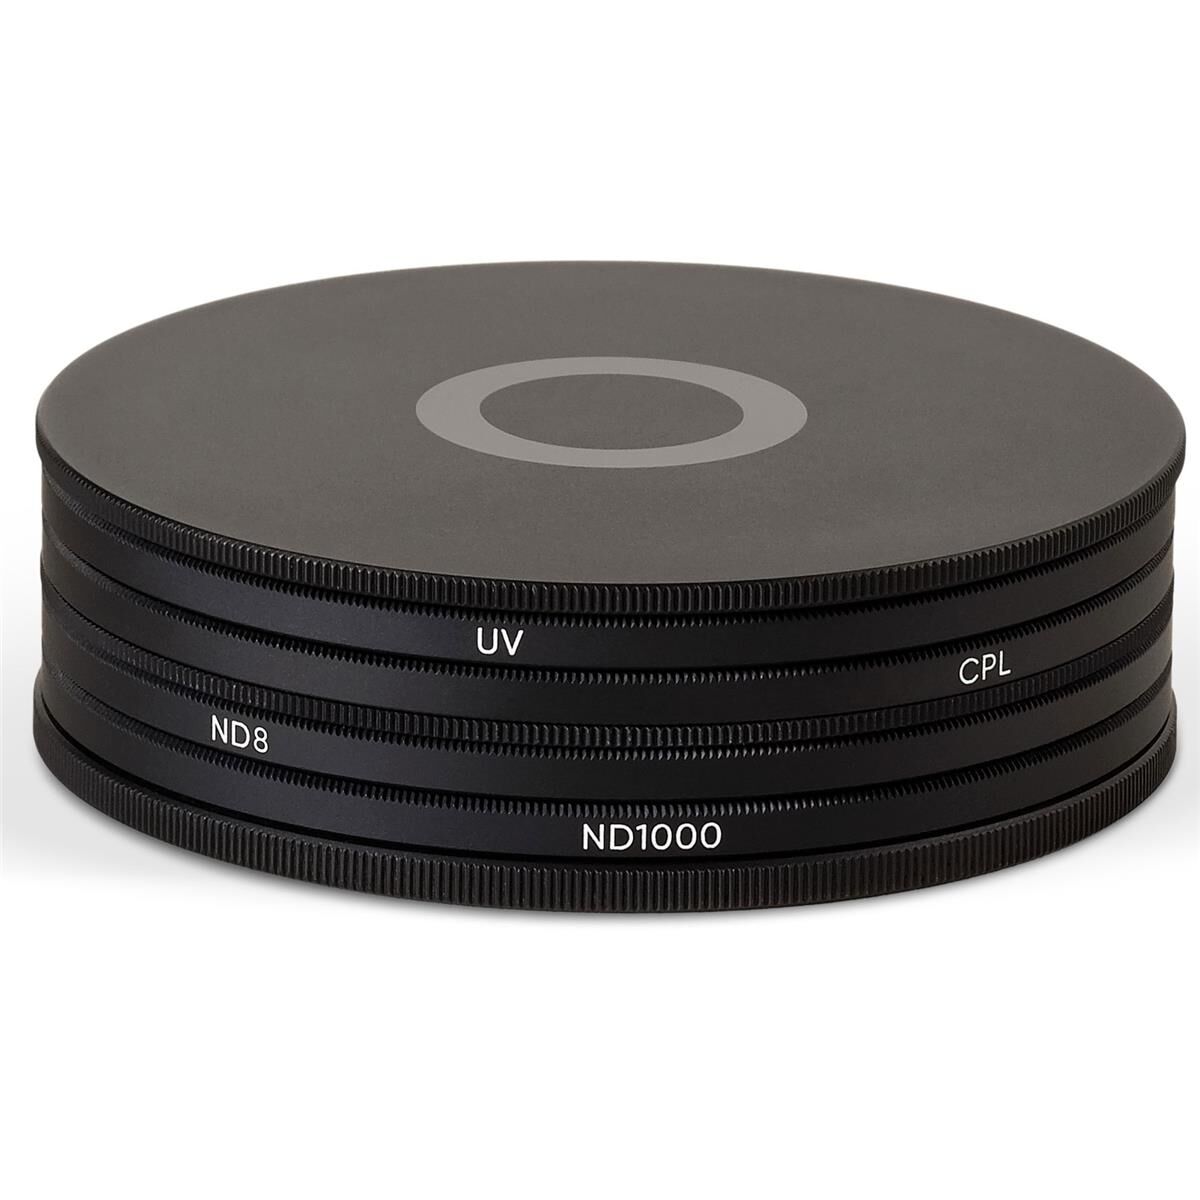 Urth 49mm Essentials Filters Kit Plus+ with UV, CPL, ND8 and ND1000 Filters